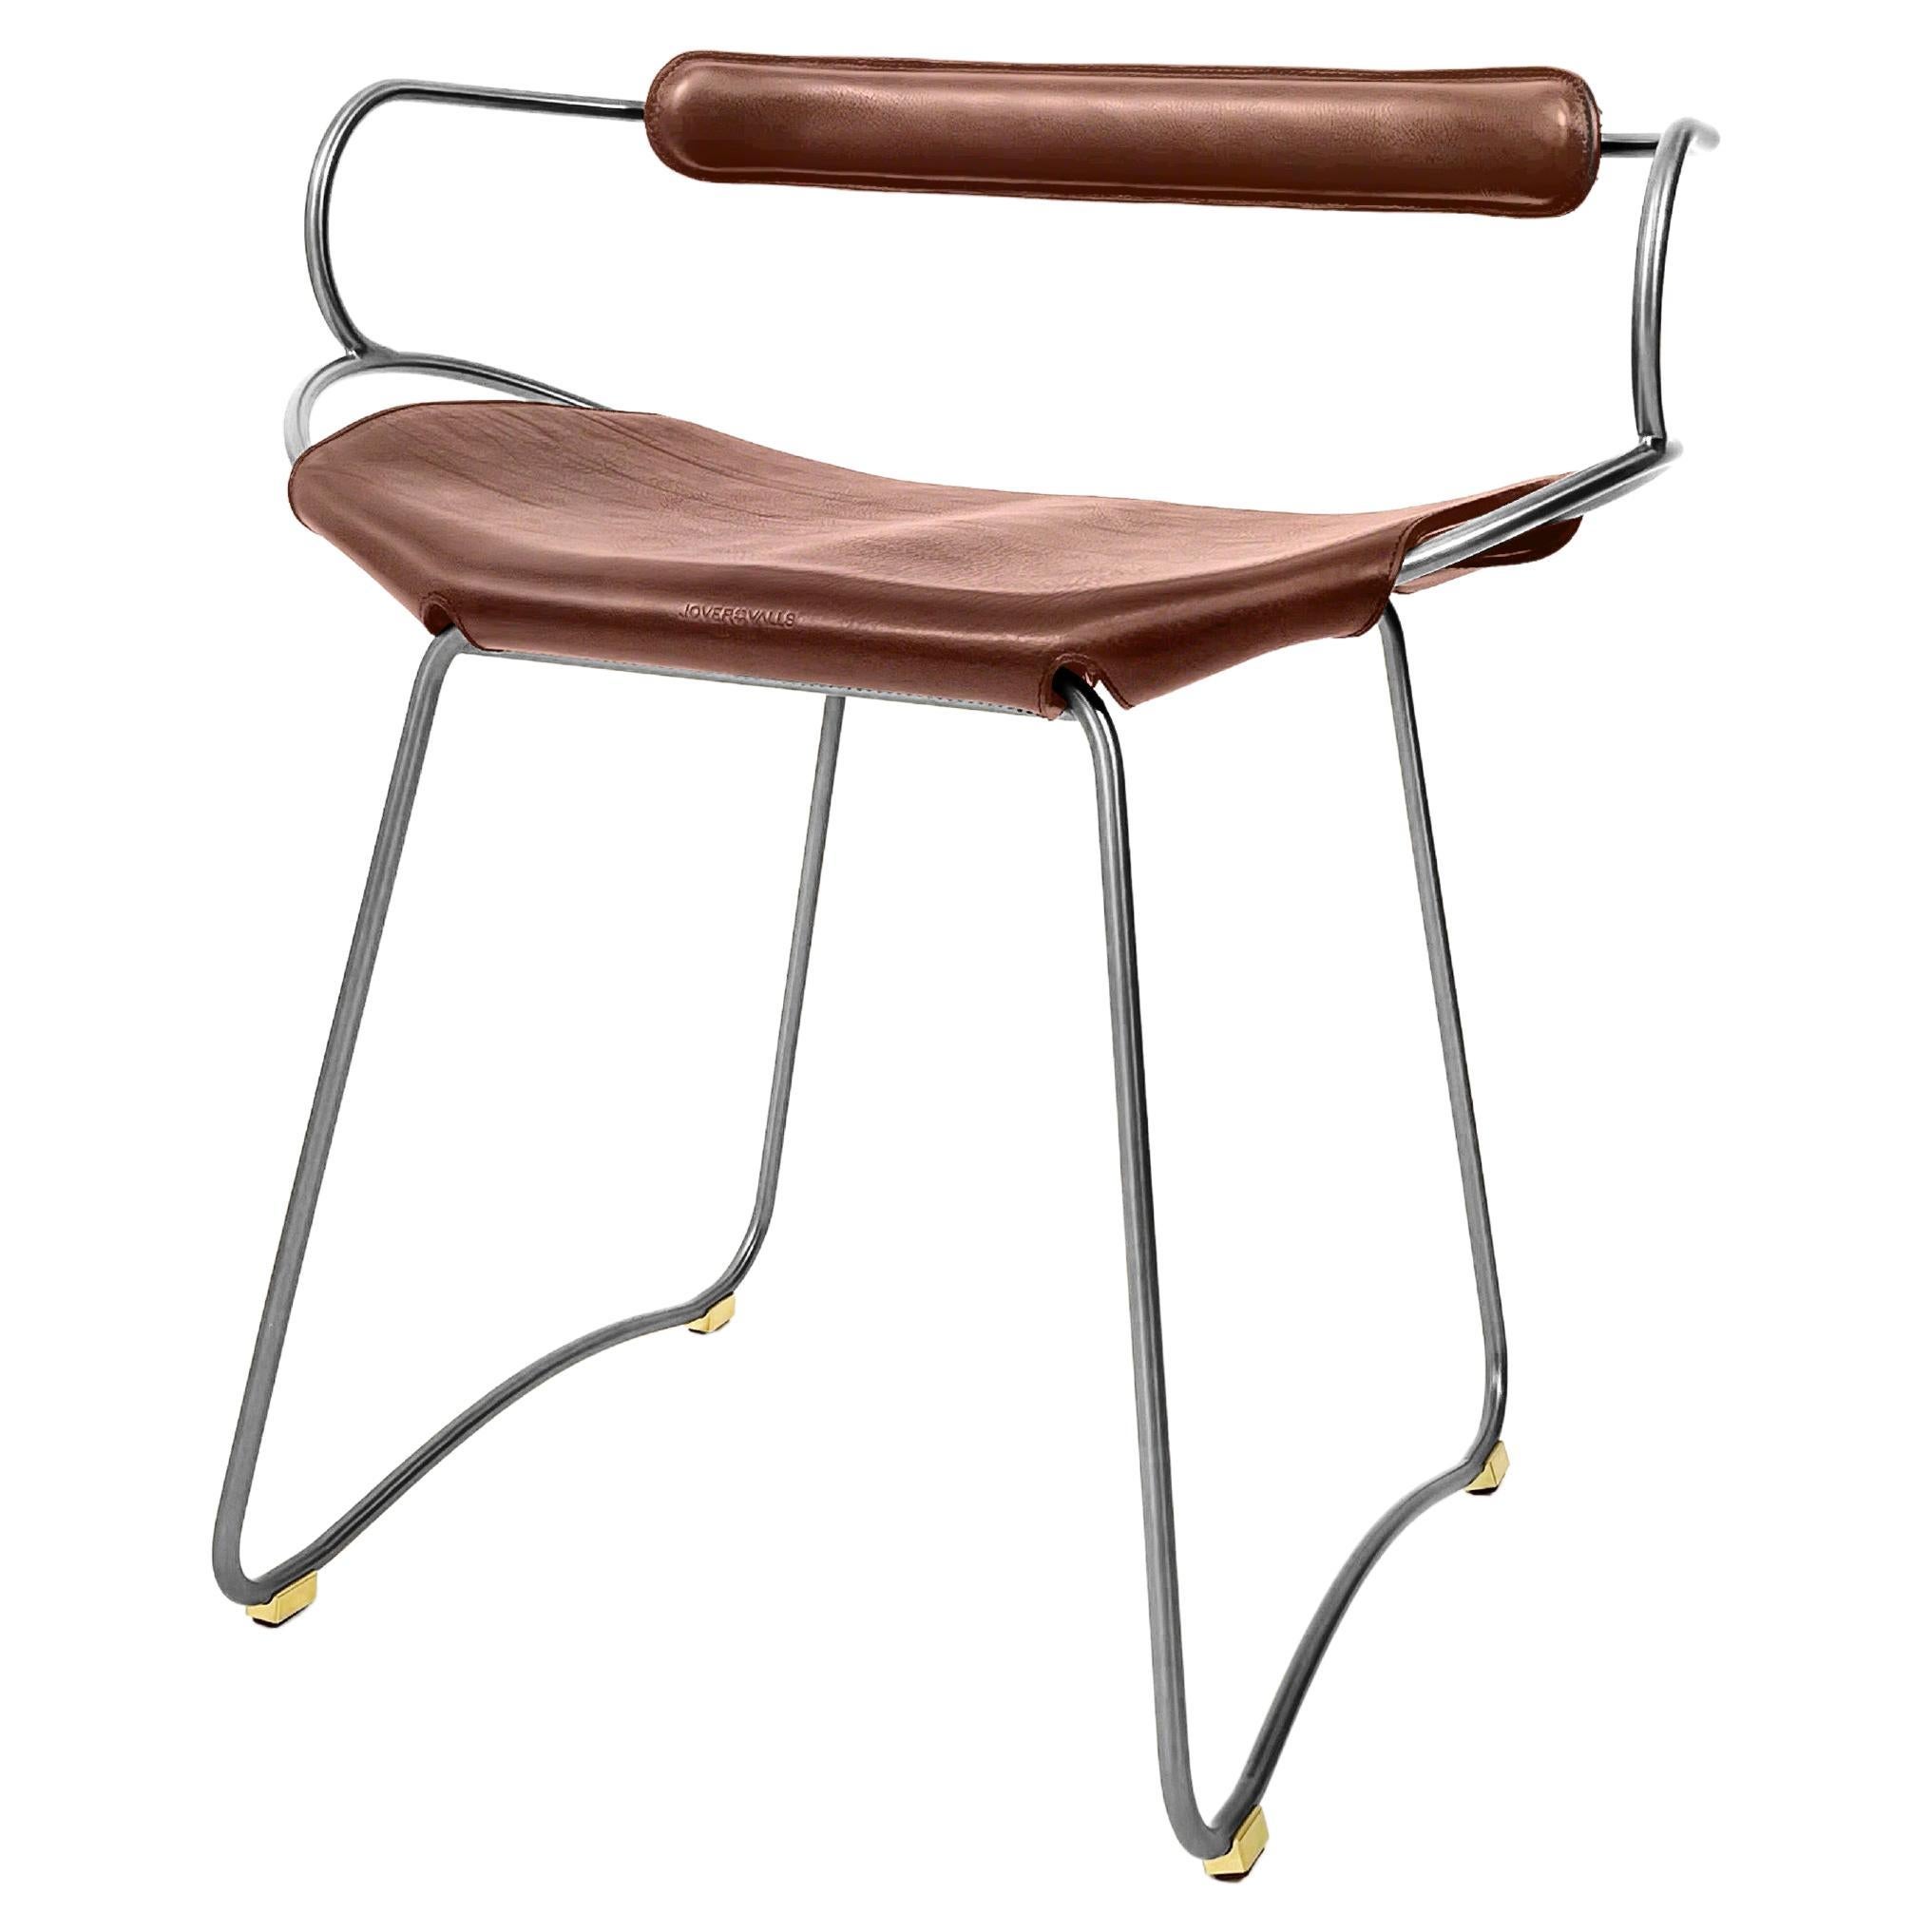 Table Bar Stool w. Backrest Old Silver Metal & Cognac Leather Organic Design For Sale